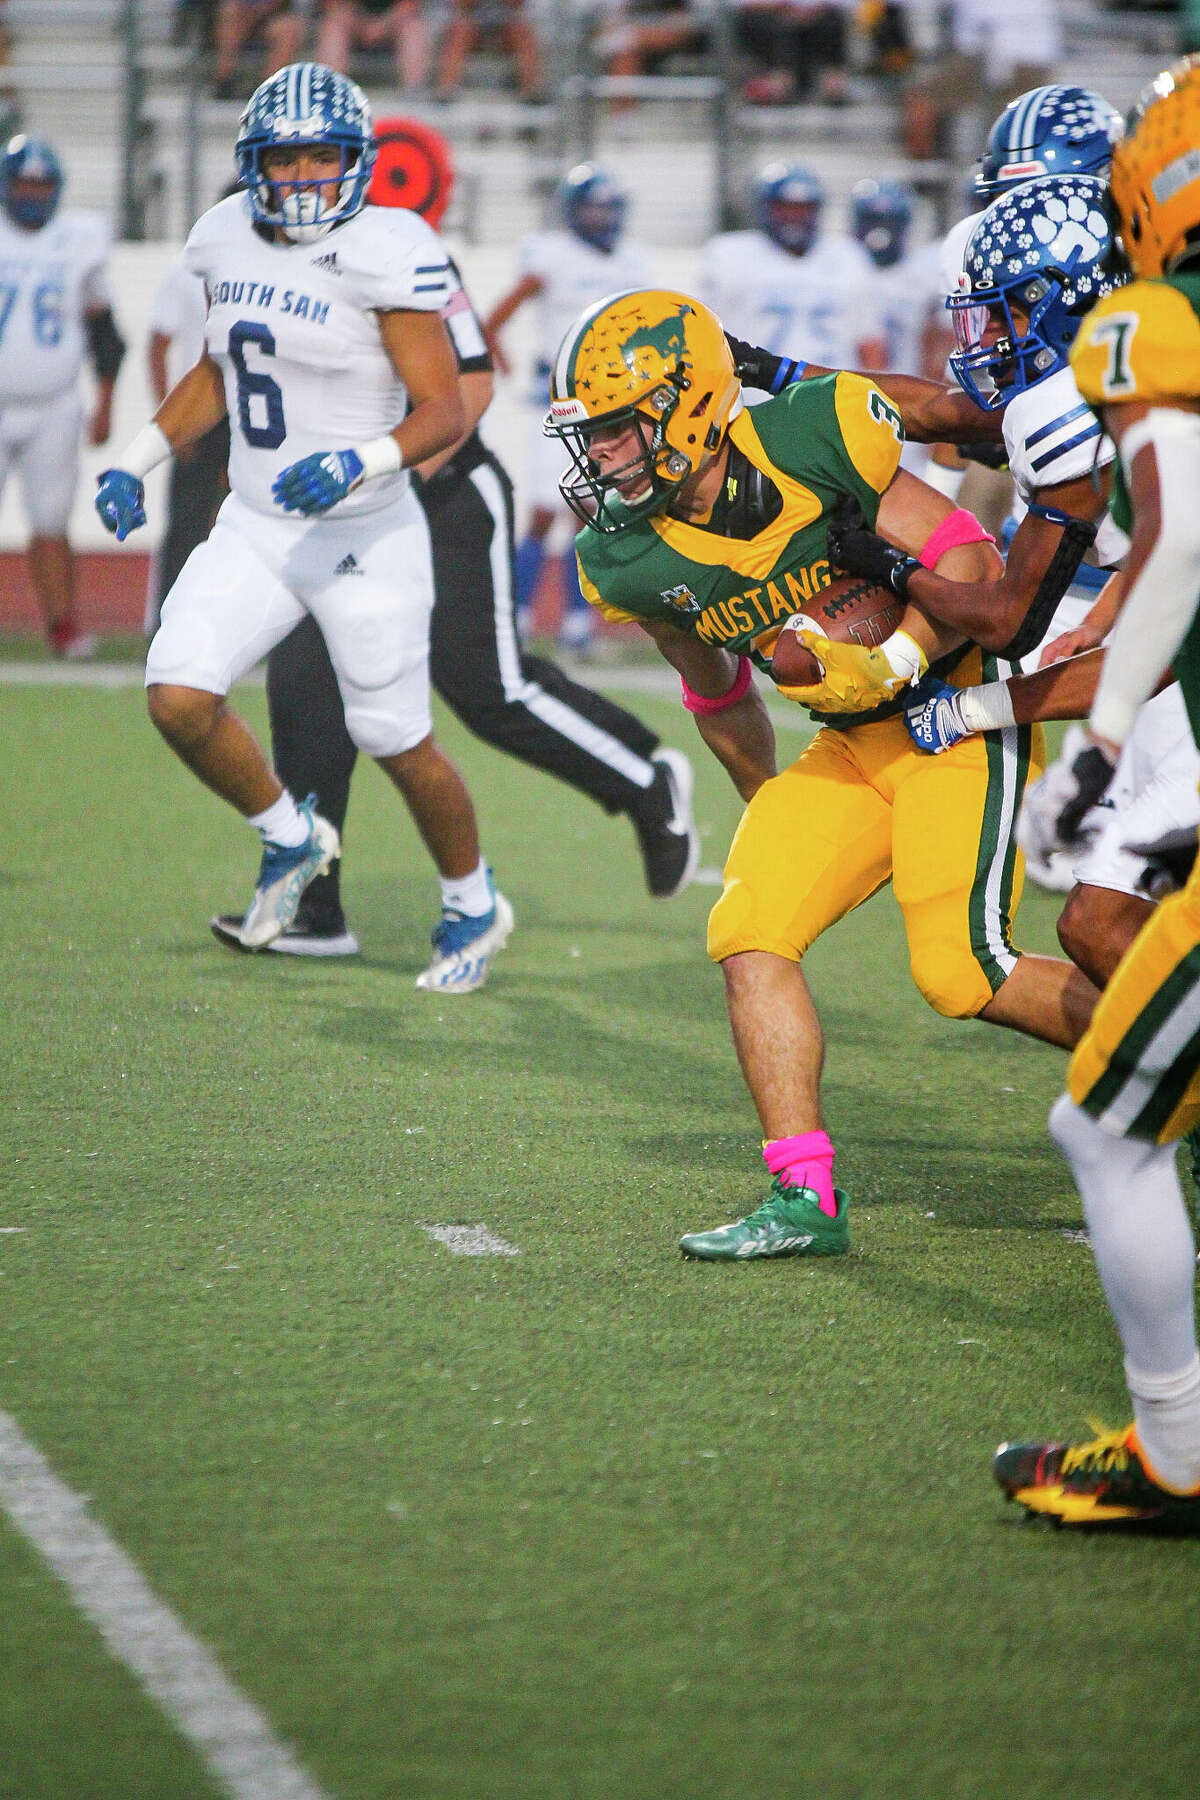 Running back Ben Limon rushed for five touchdowns in Nixon's win over South San Antonio on Friday.